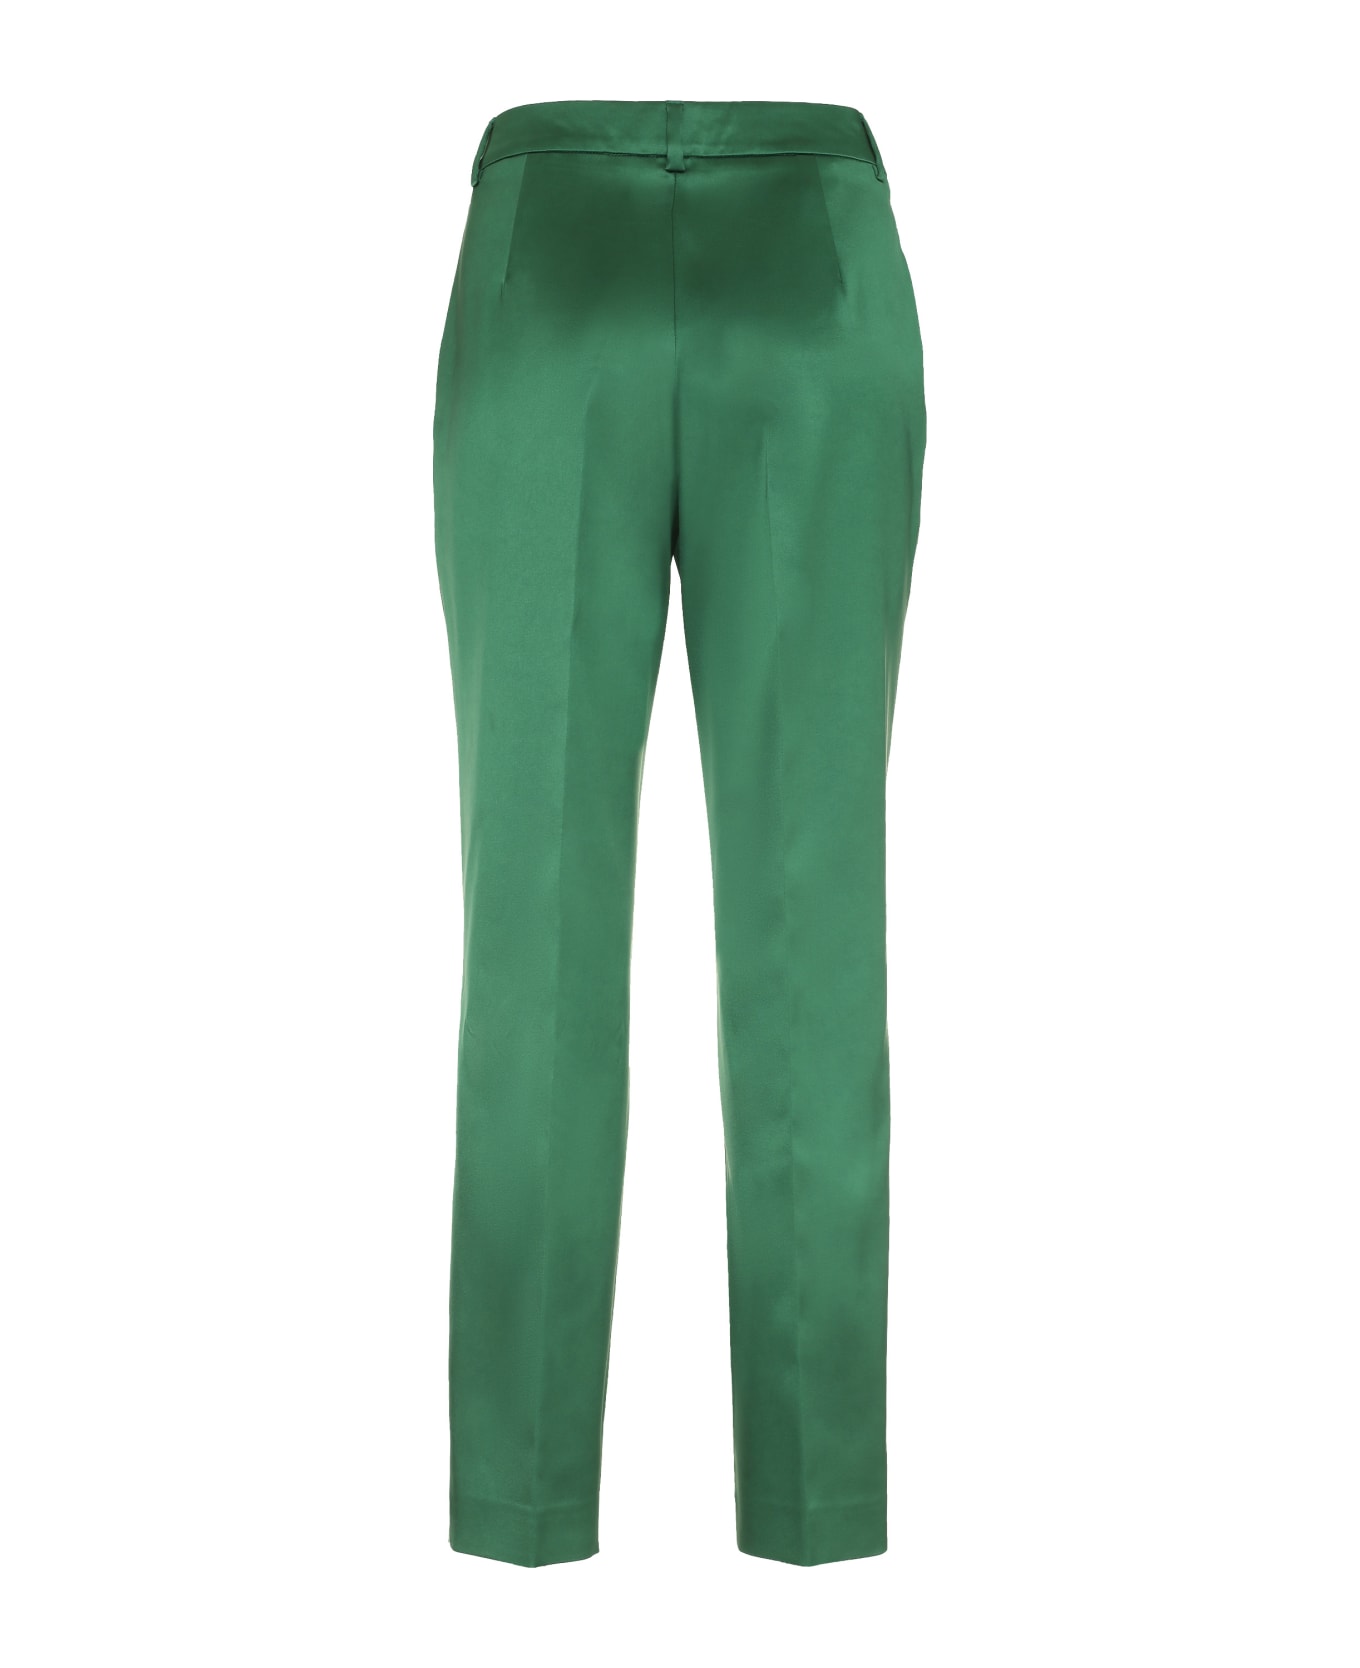 Boutique Moschino Satin Trousers - green